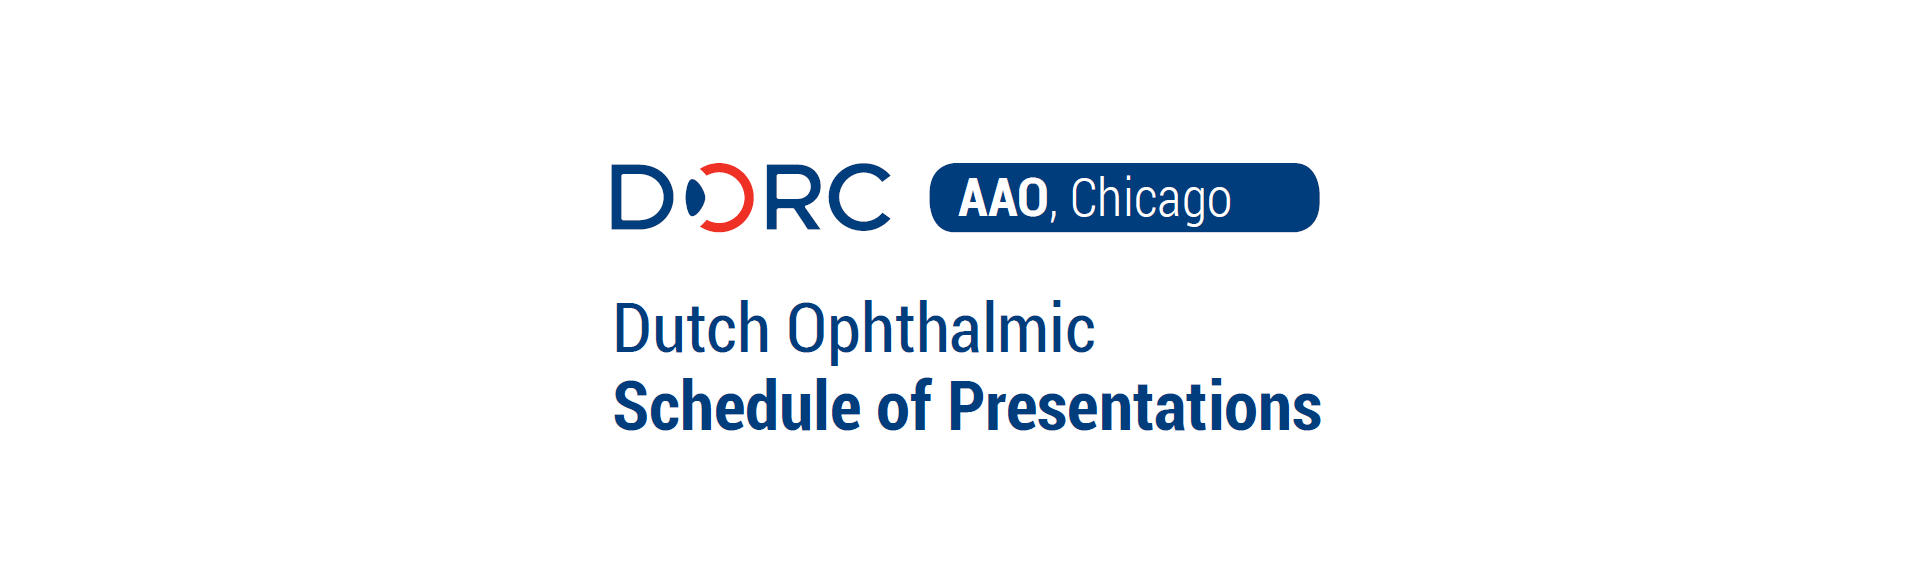 Dutch Ophthalmic USA at AAO, Chicago